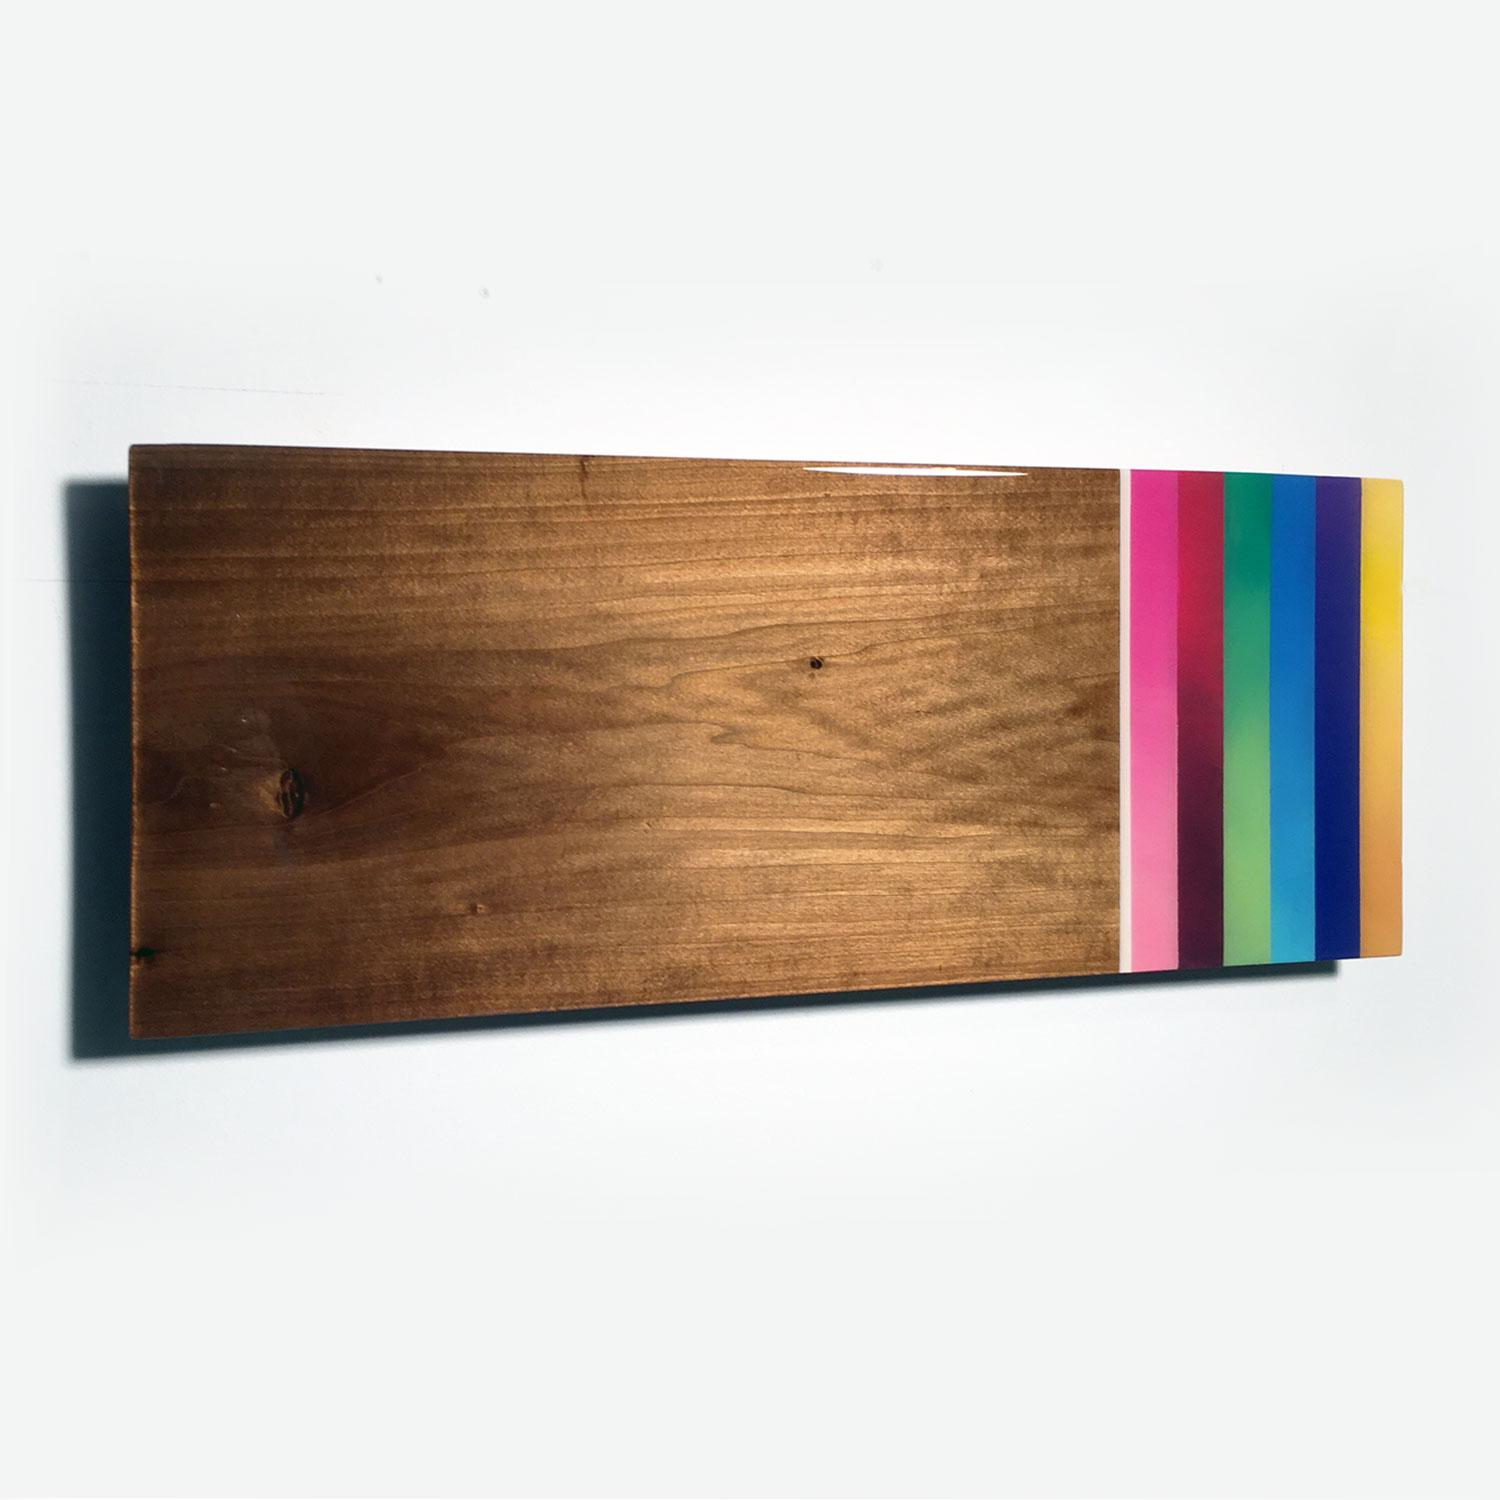 Mini Leaner #7, Contemporary Painted Rainbow Wall Sculpture, Shiny Exotic Wood